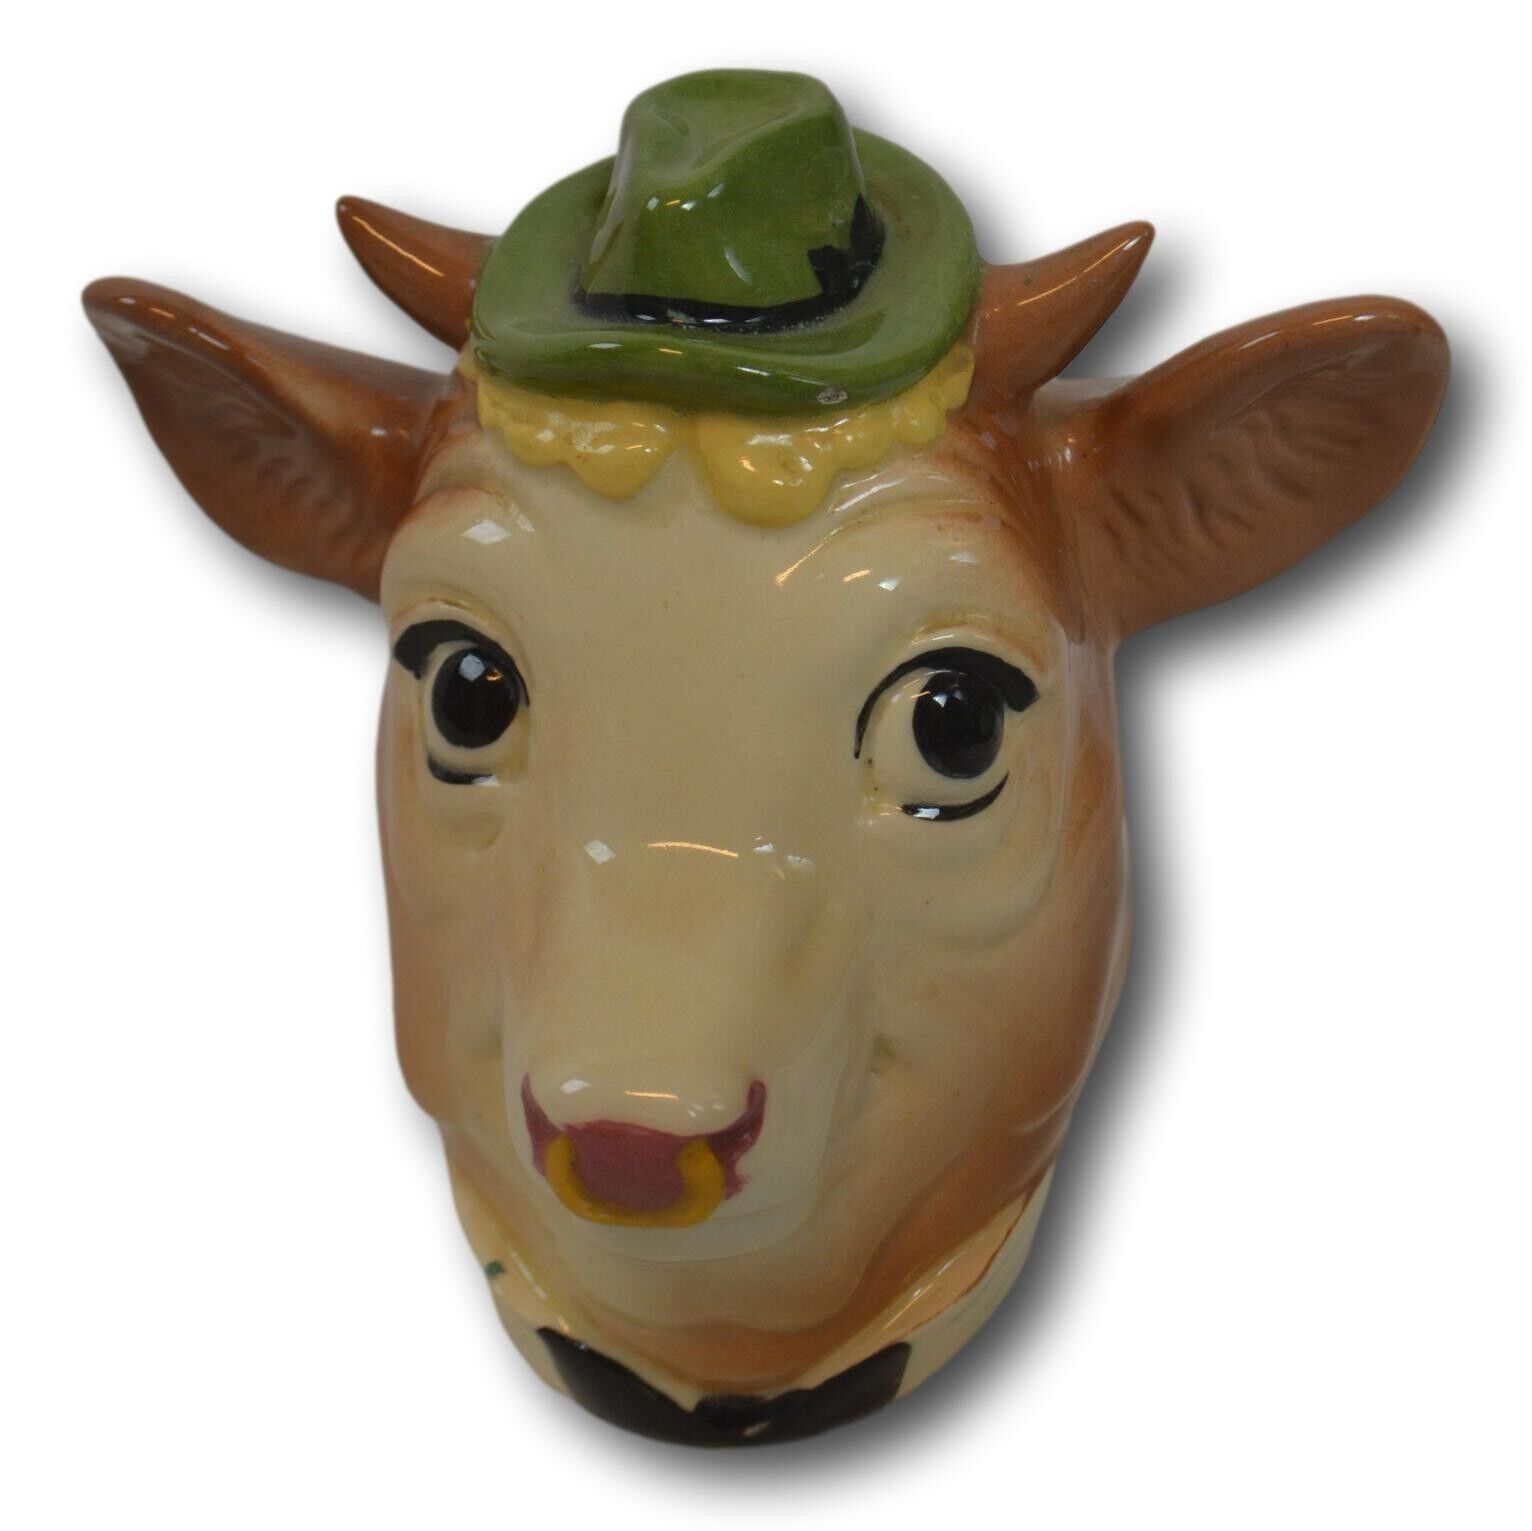 Vintage Borden Cow / Bull Head with Hat Figurine Advertising